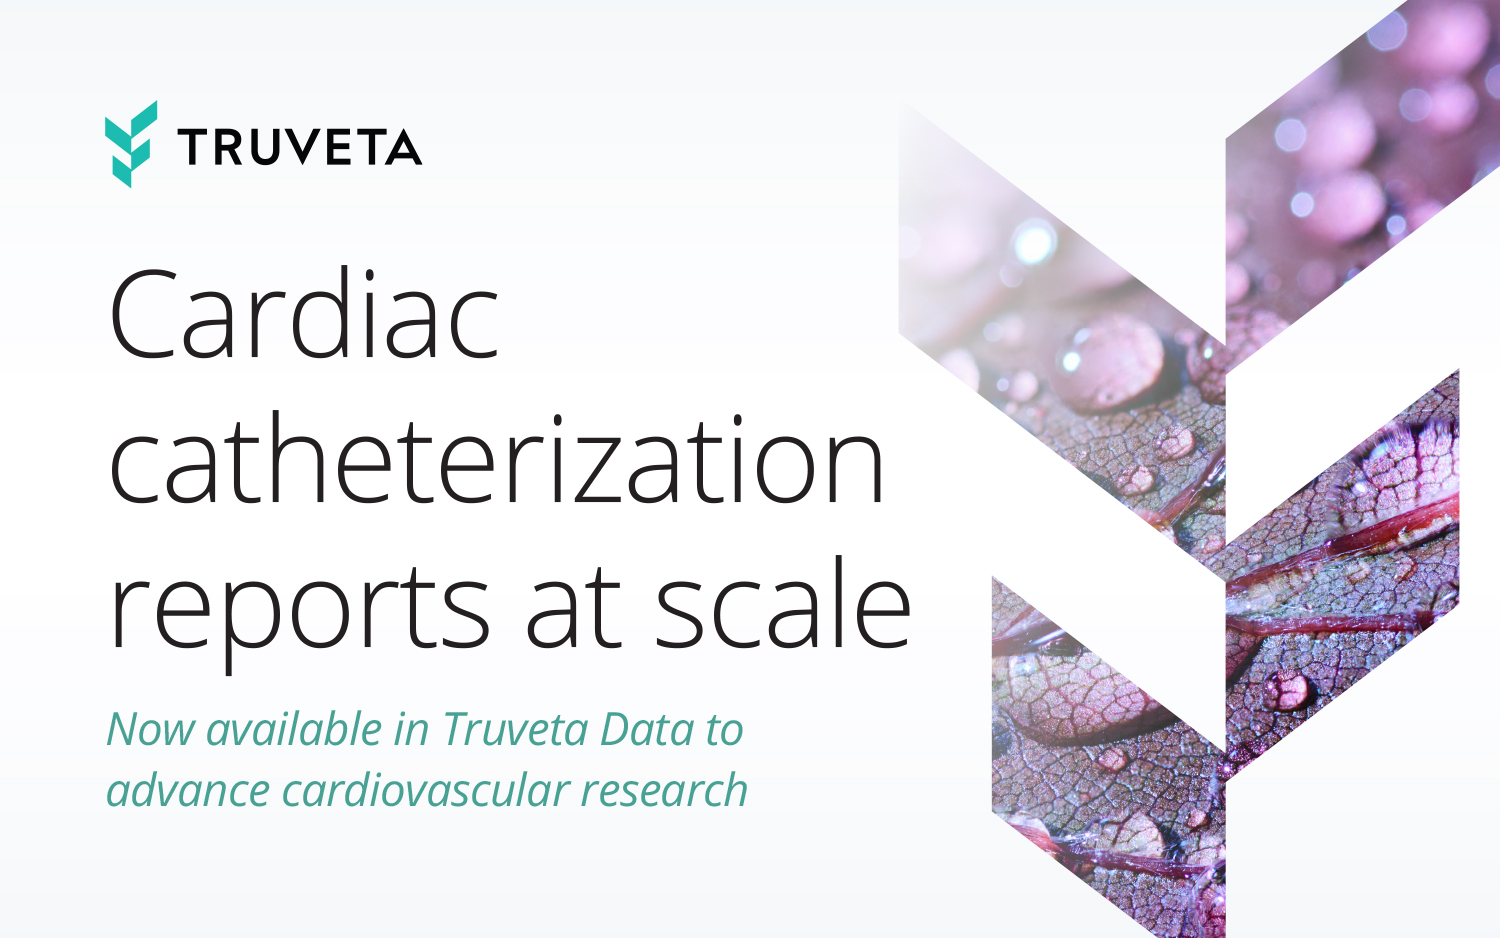 Truveta Data now includes cardiac catheterization reports within EHR data for medical research to improve cardiovascular care